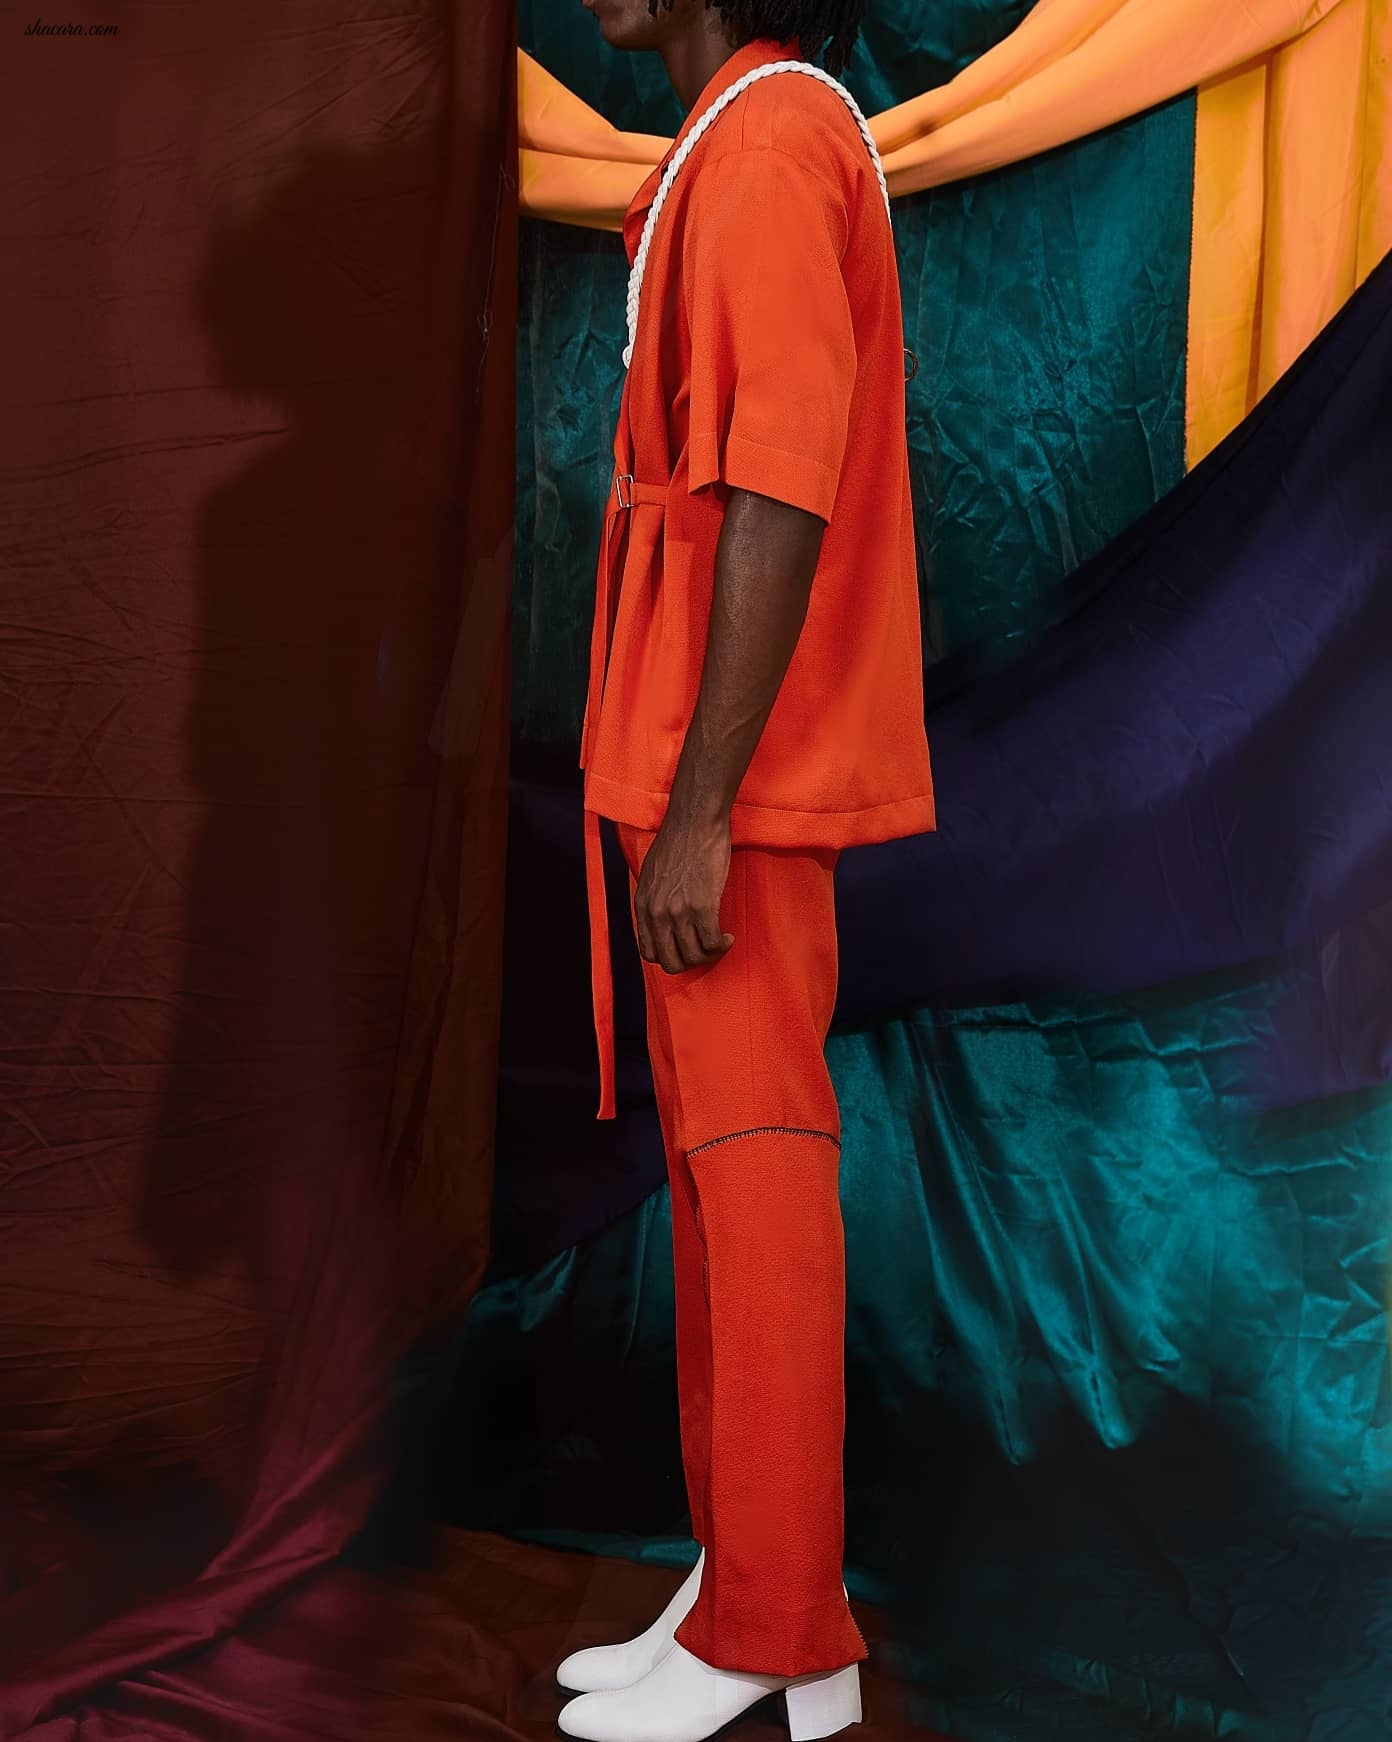 Silk, Satin & Bold Colors! An Exclusive Look At Chimmy & Co’s Spring/Summer 2021 Collection